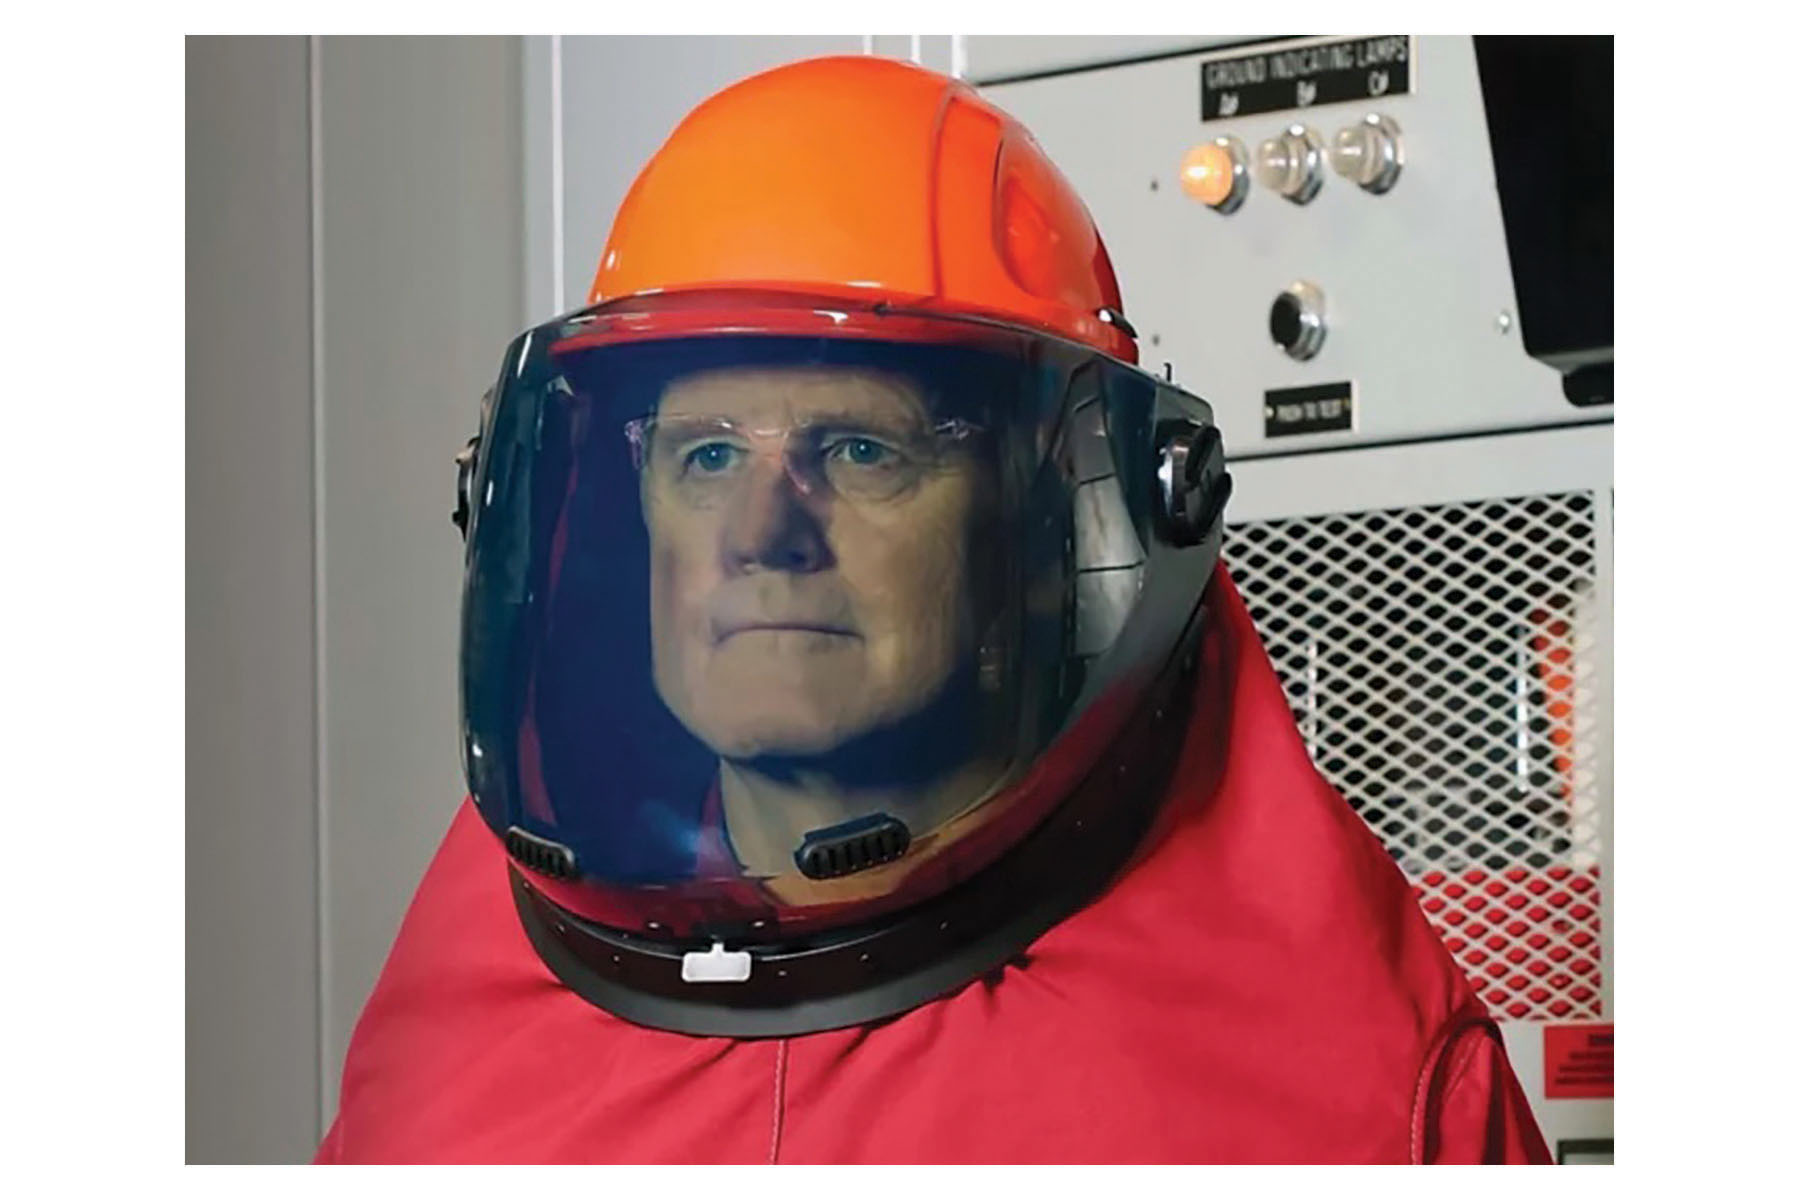 A man in a red suit with an orange hard hat and gray face shield. Image by Honeywell.